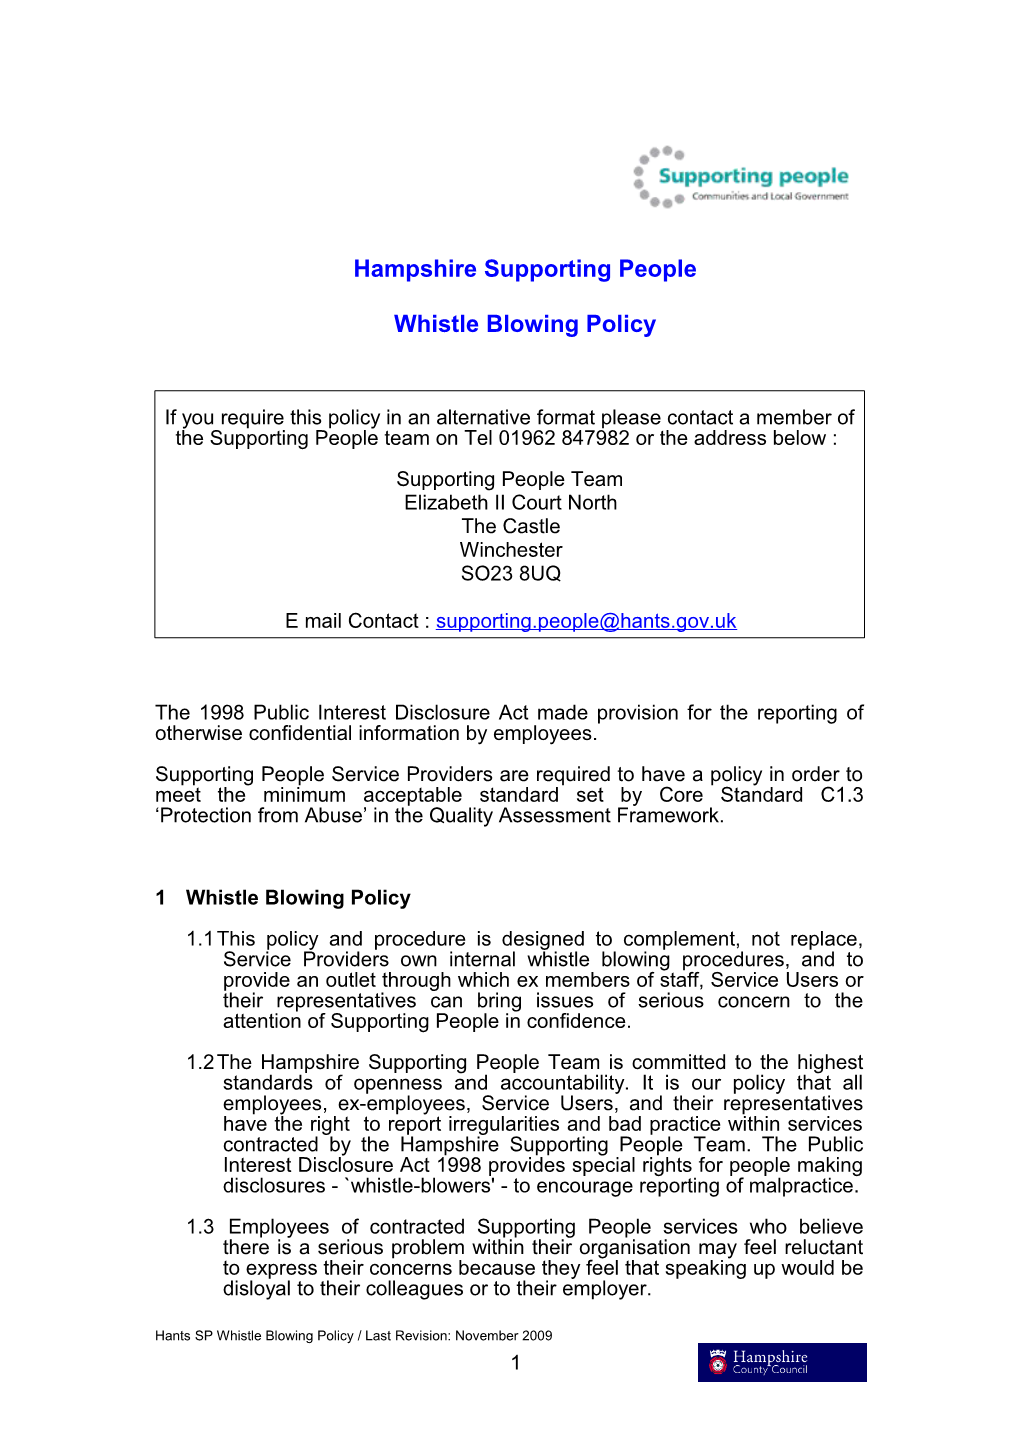 Hampshire Supporting People Whistle Blowing Policy